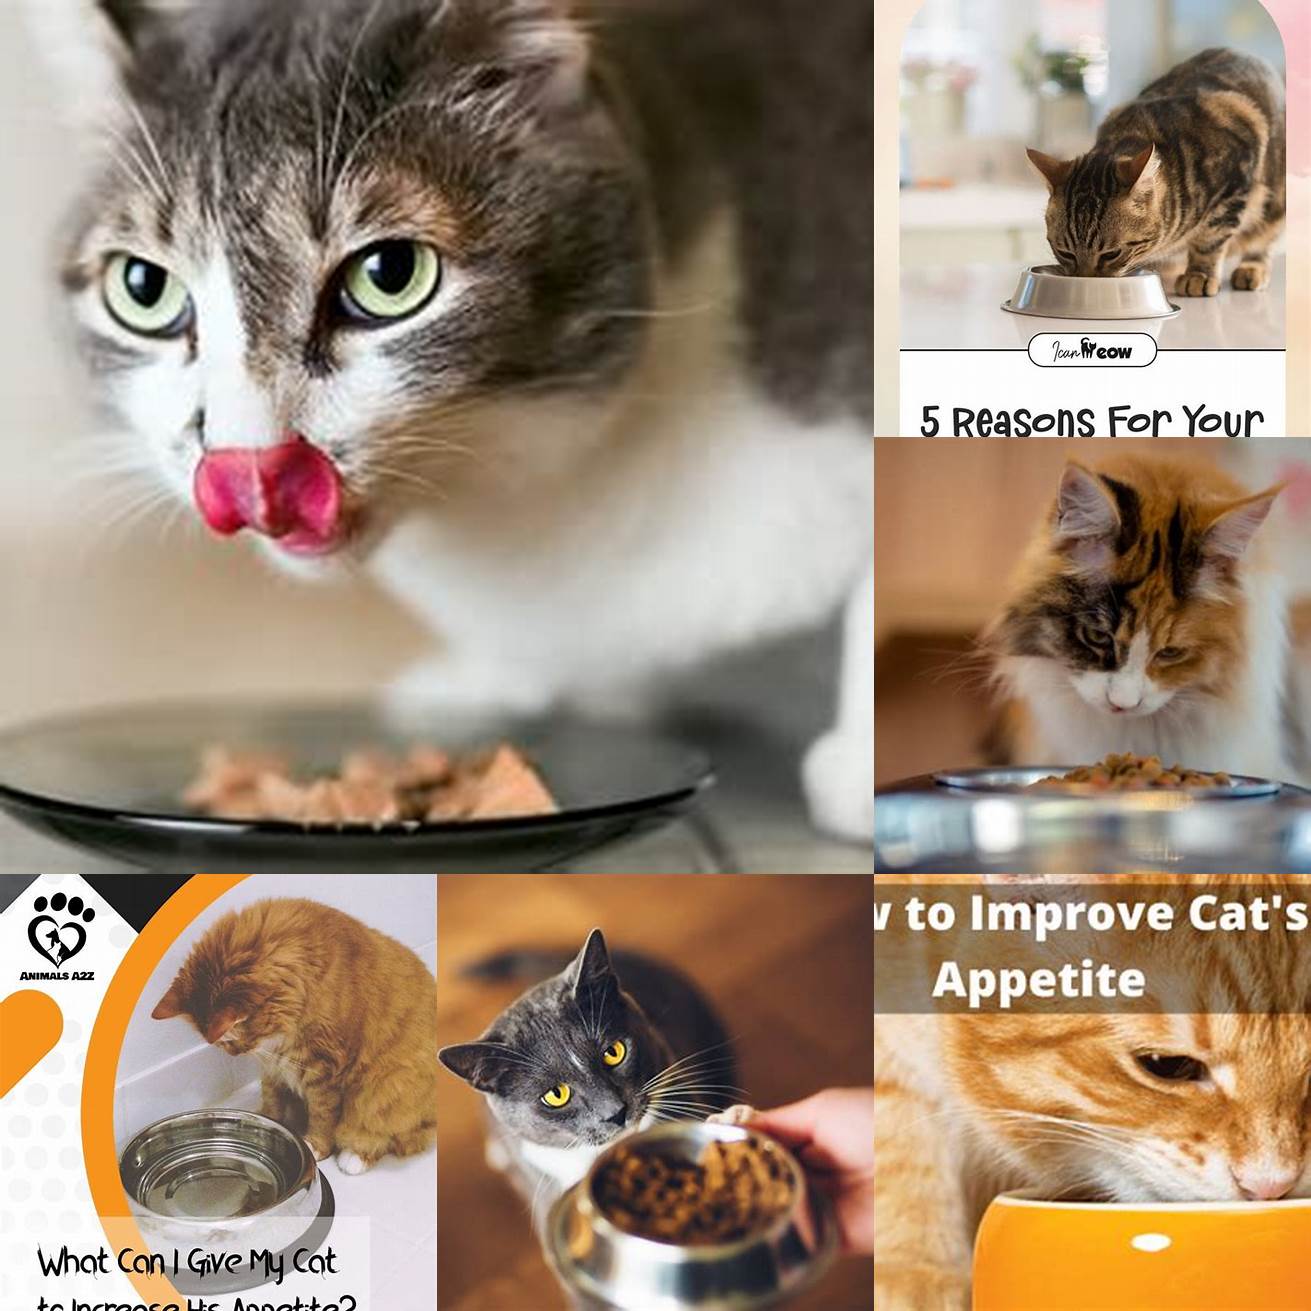 Monitor your cats appetite